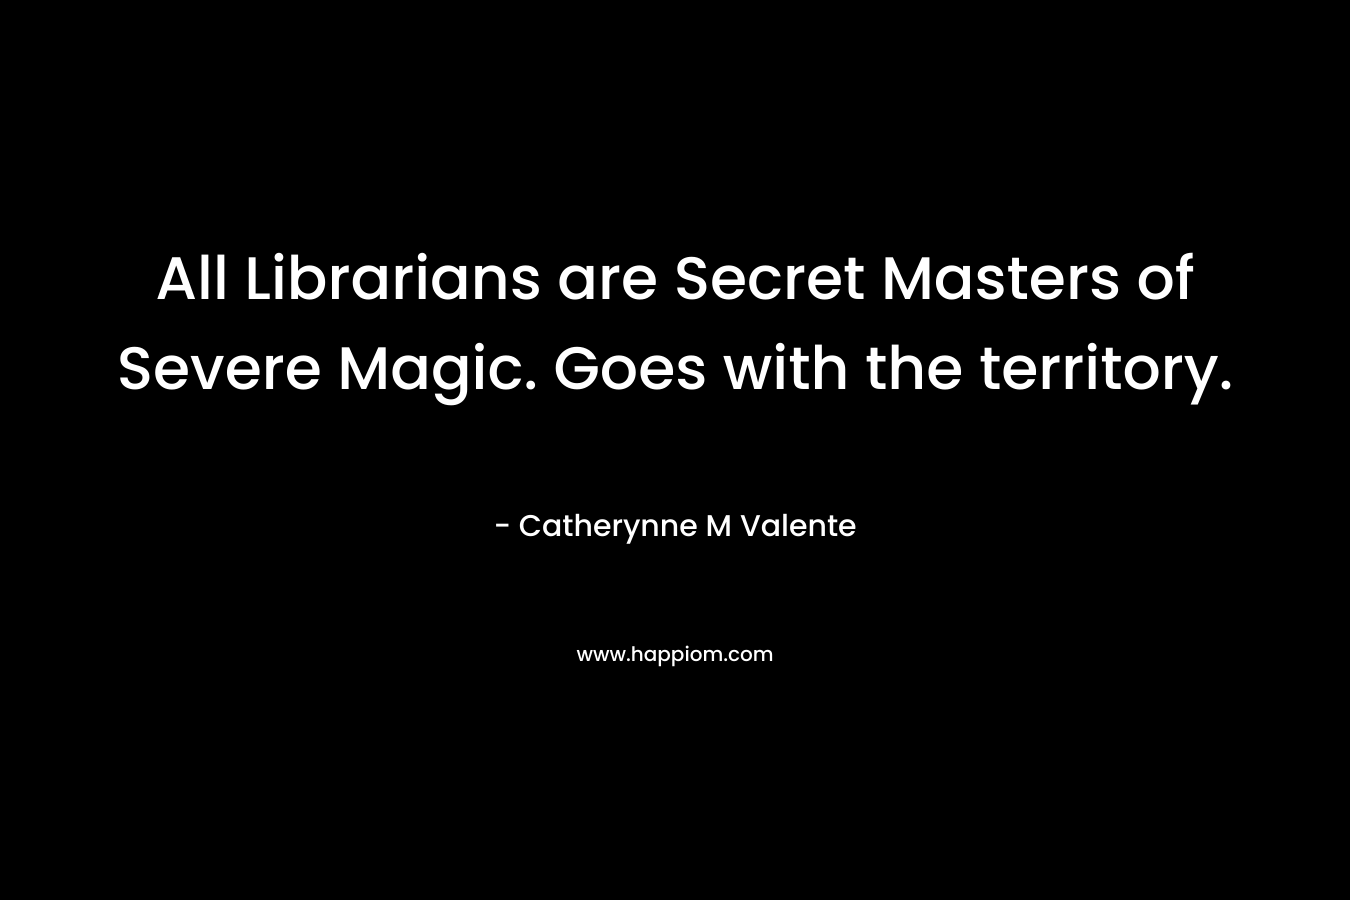 All Librarians are Secret Masters of Severe Magic. Goes with the territory.